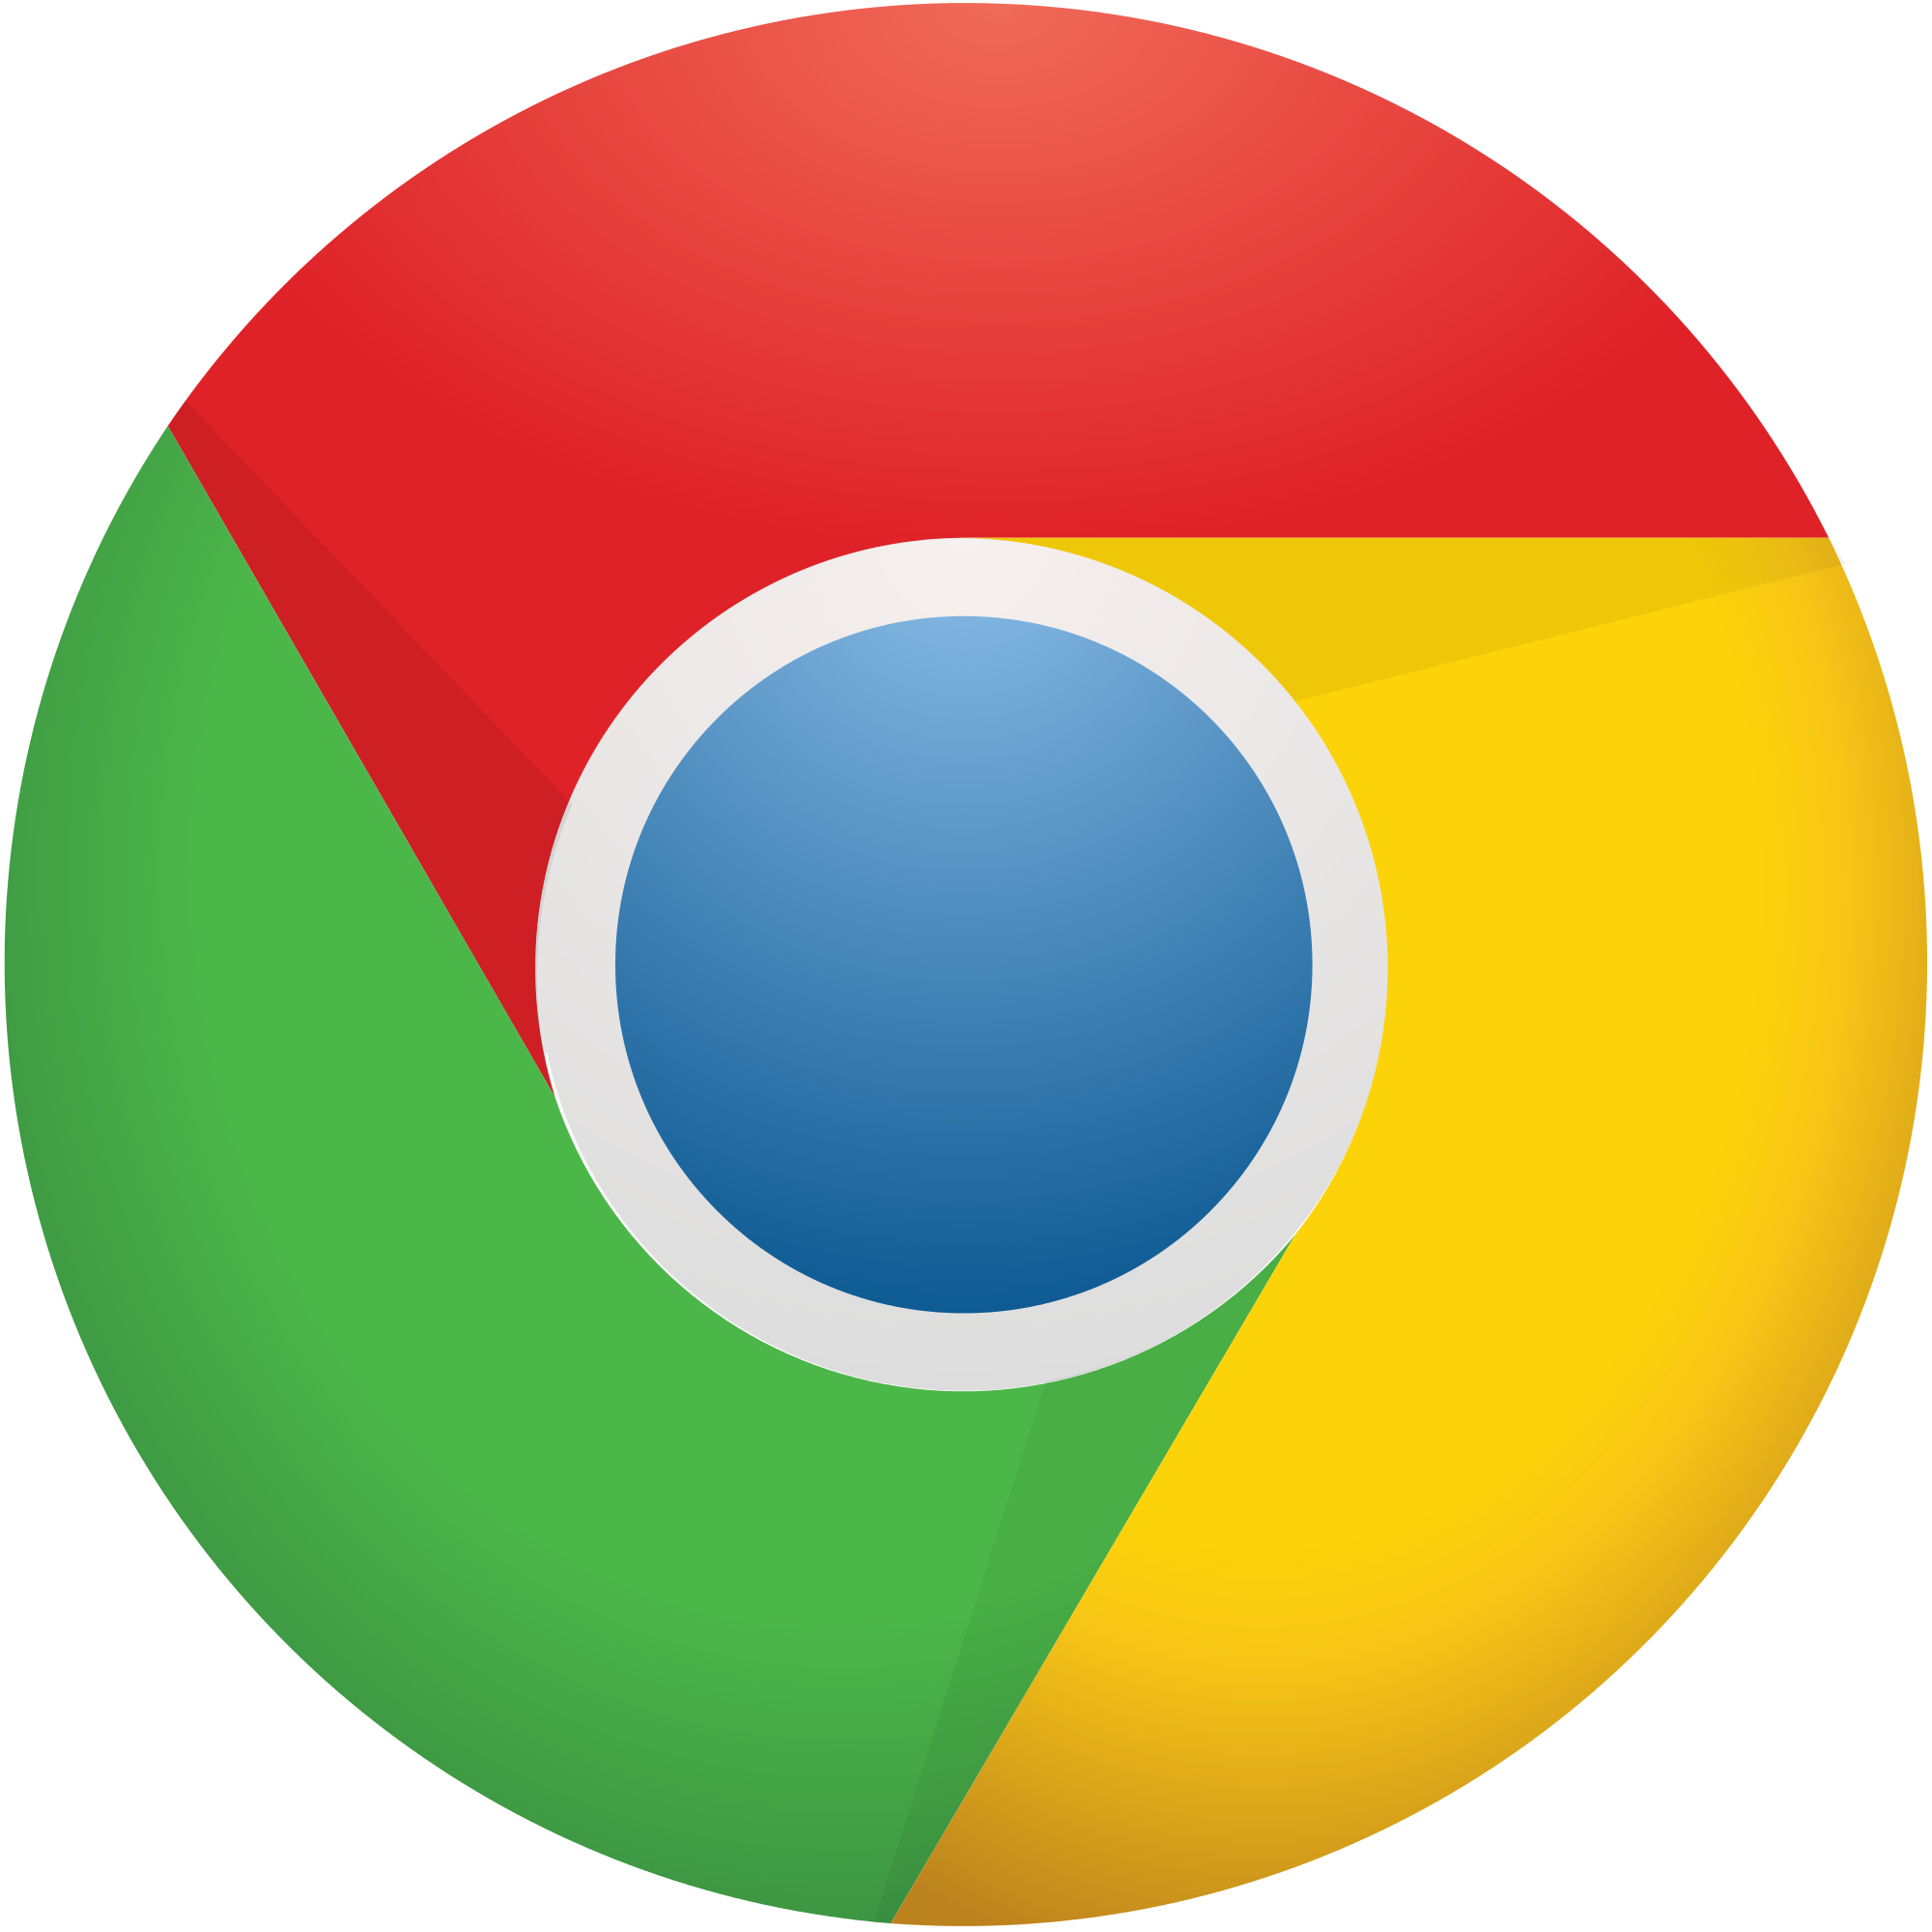 Google Chrome users could get a £4,000 payout – find out if you’re eligible